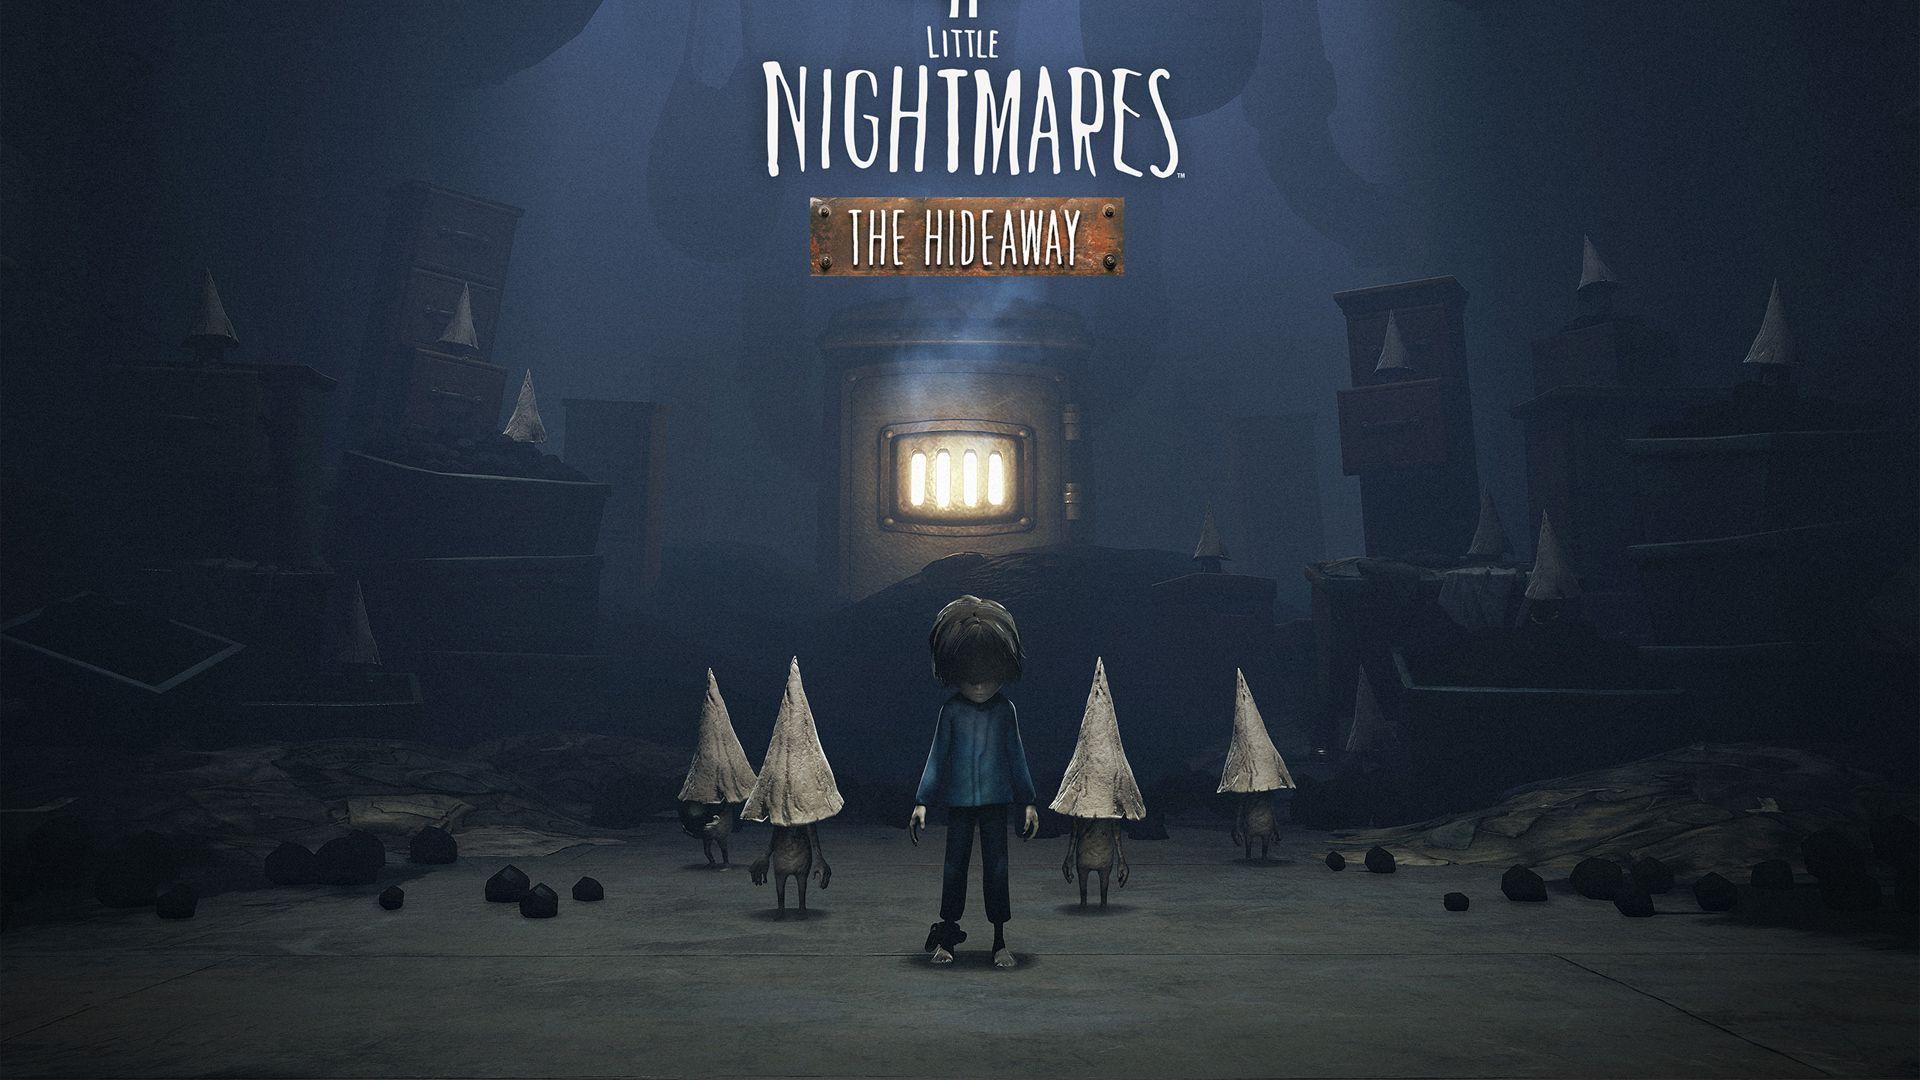 The Kid from The Hideaway DLC. Wallpaper from Little Nightmares